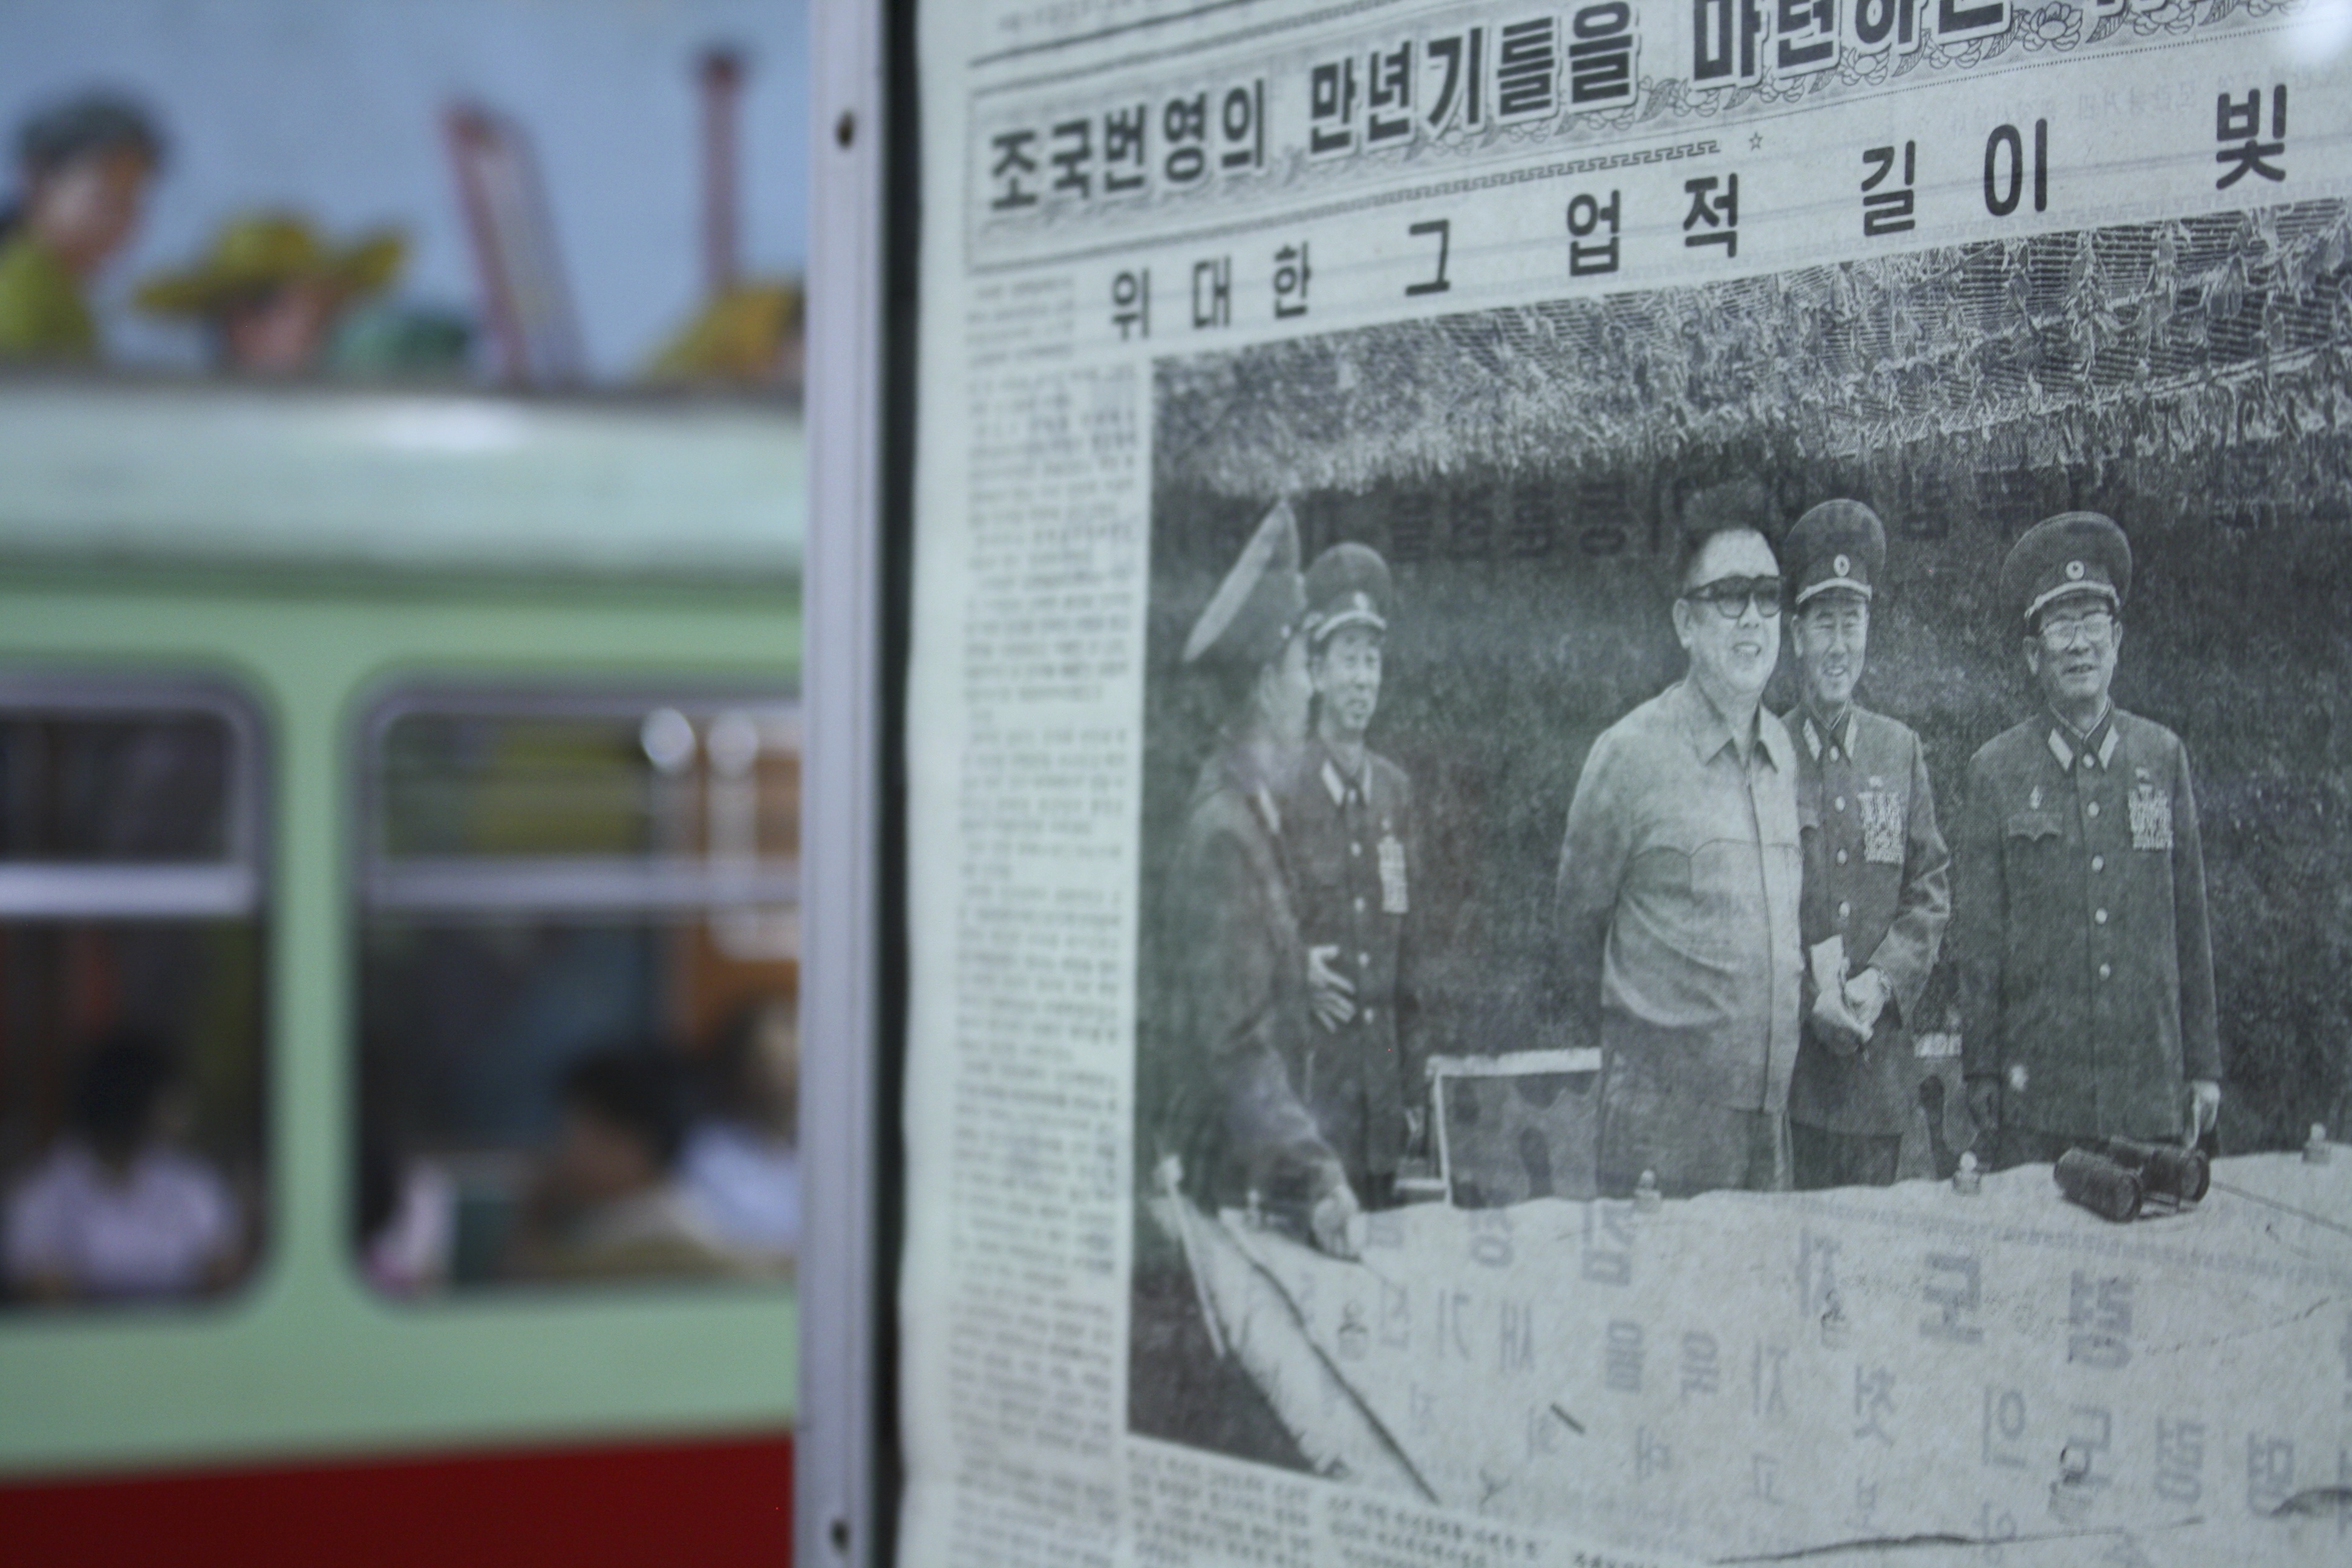 A newspaper in the Pyongyang subway.